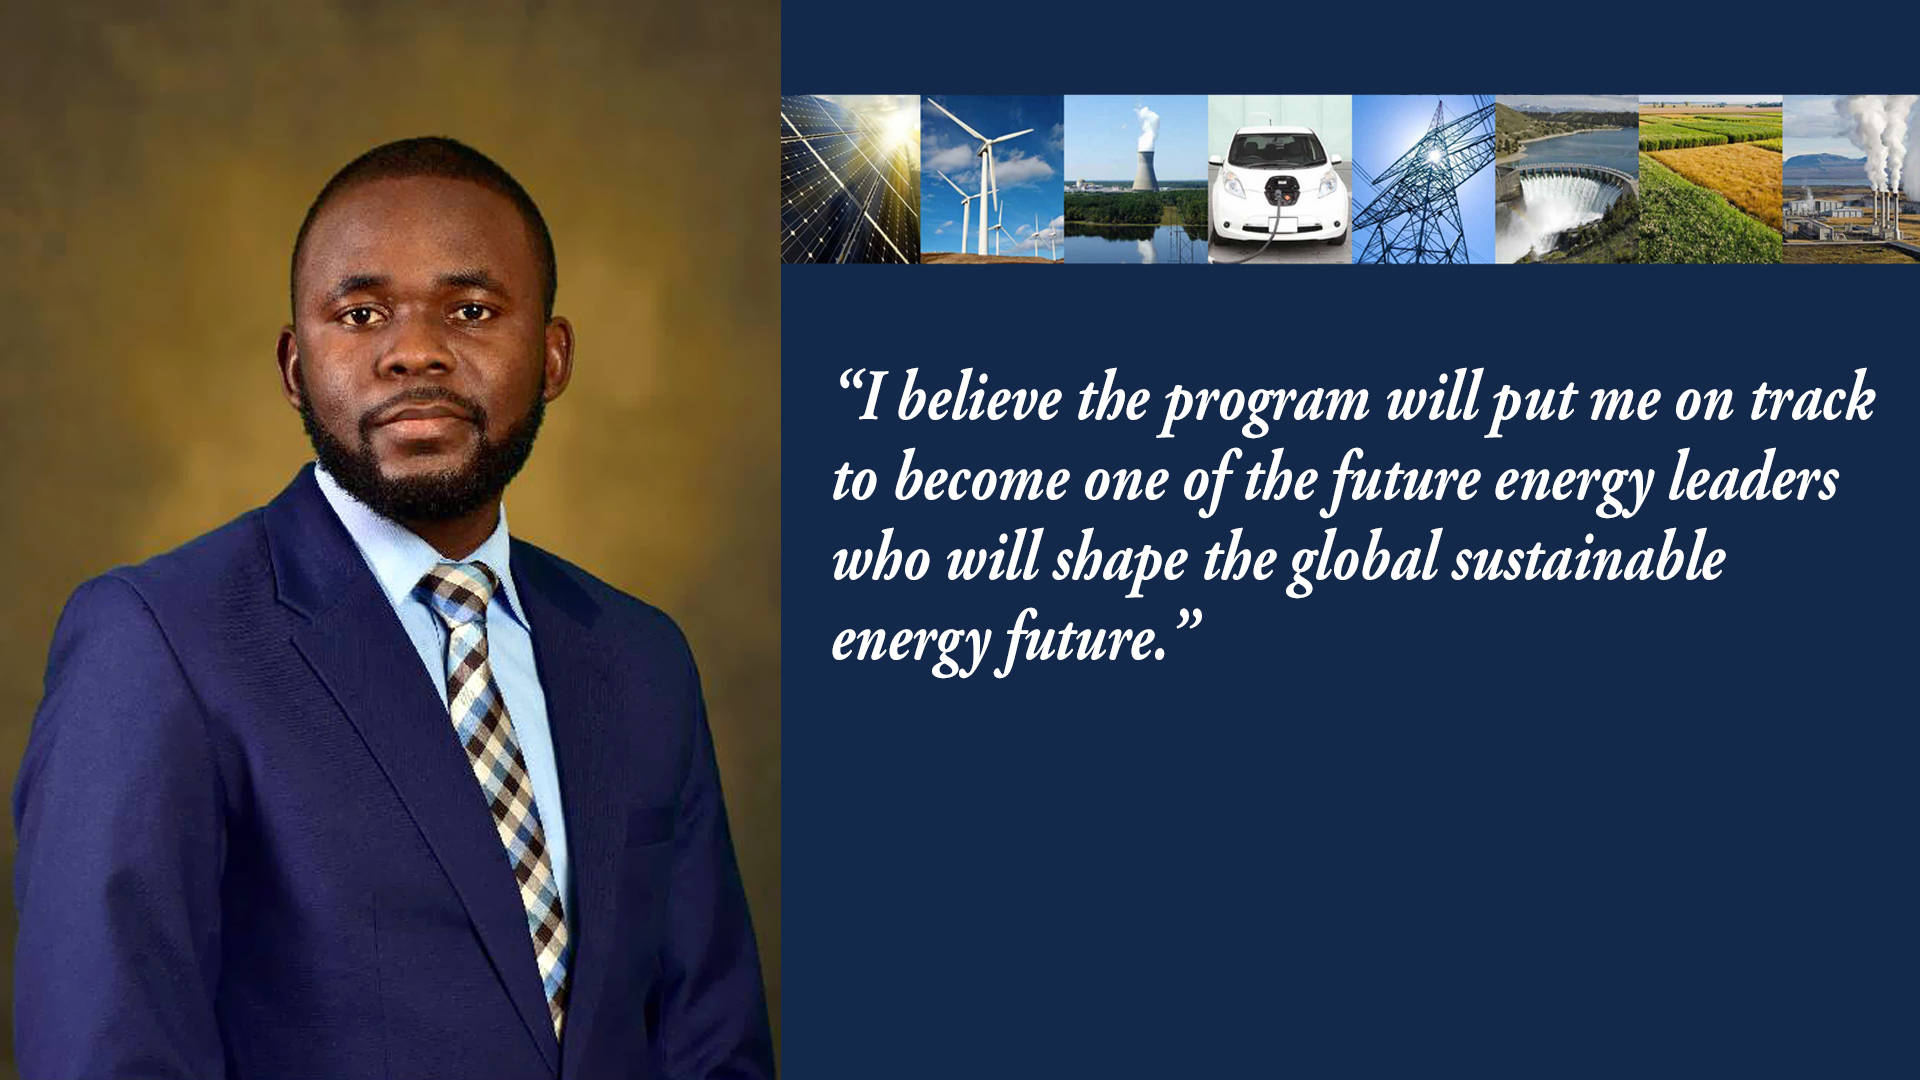 Energy professional sees Energy Systems degree as means to broaden knowledge